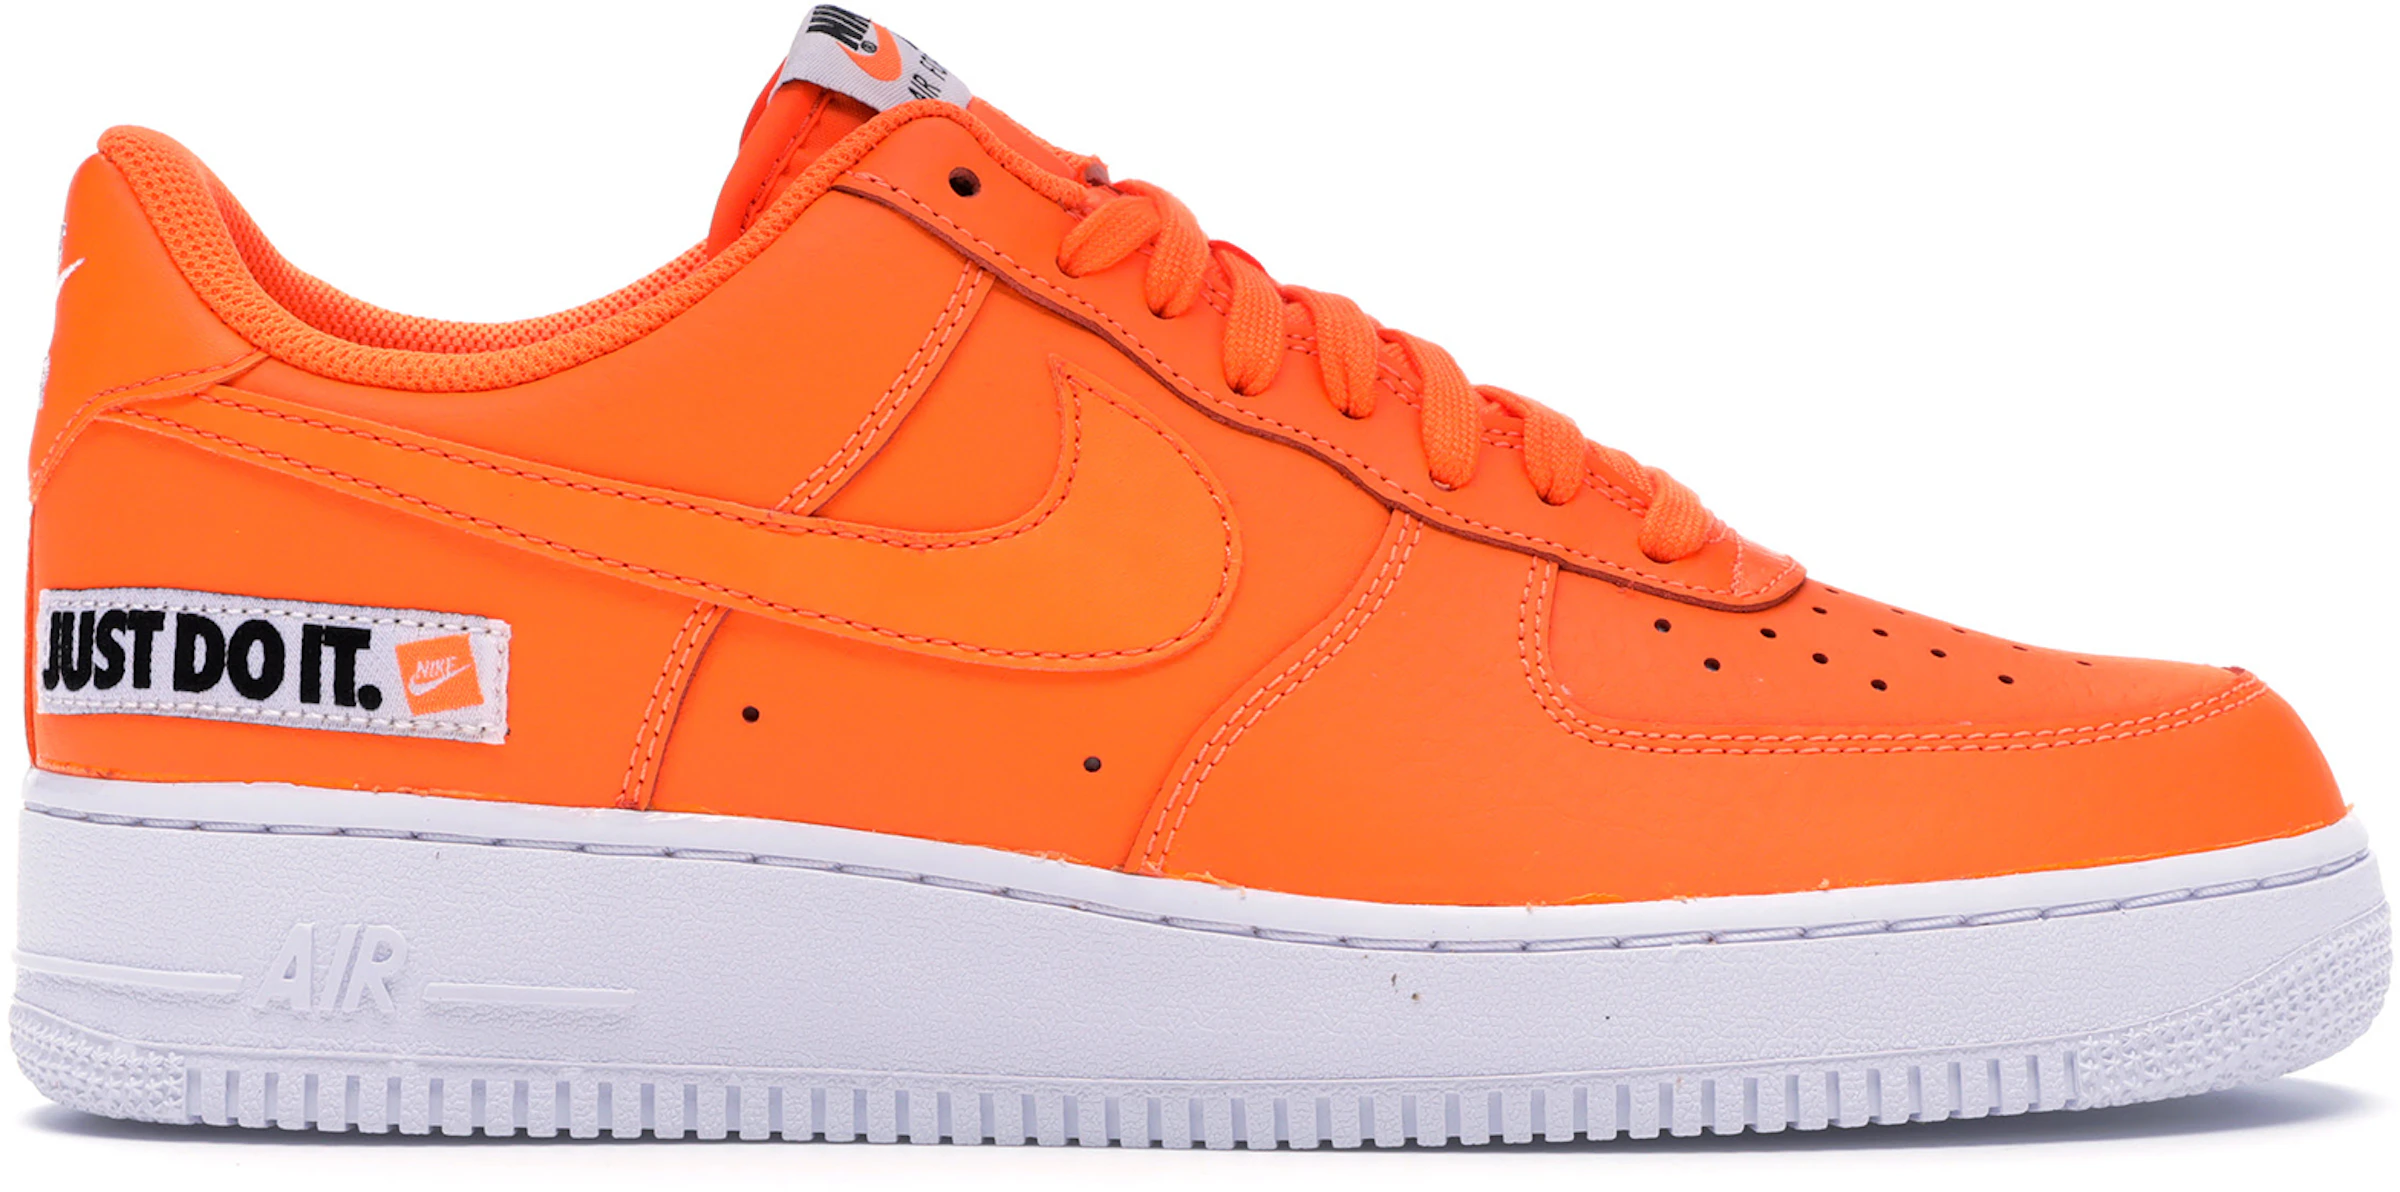 Nike Air Force 1 Low Just Do It Pack Orange - AO6296-800/BQ5360-800 -